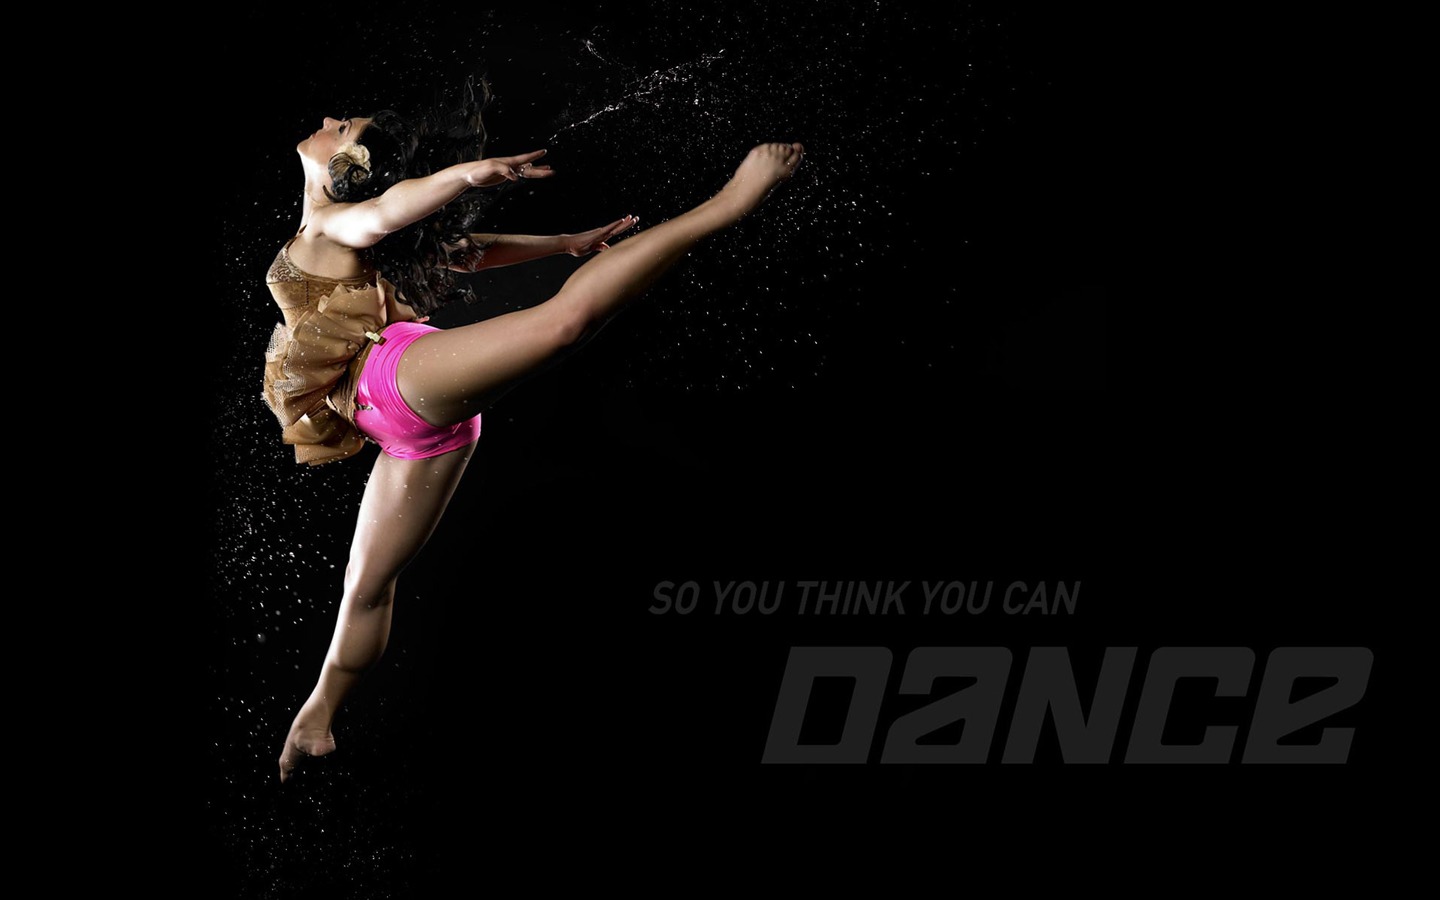 So You Think You Can Dance Wallpaper (1) #17 - 1440x900